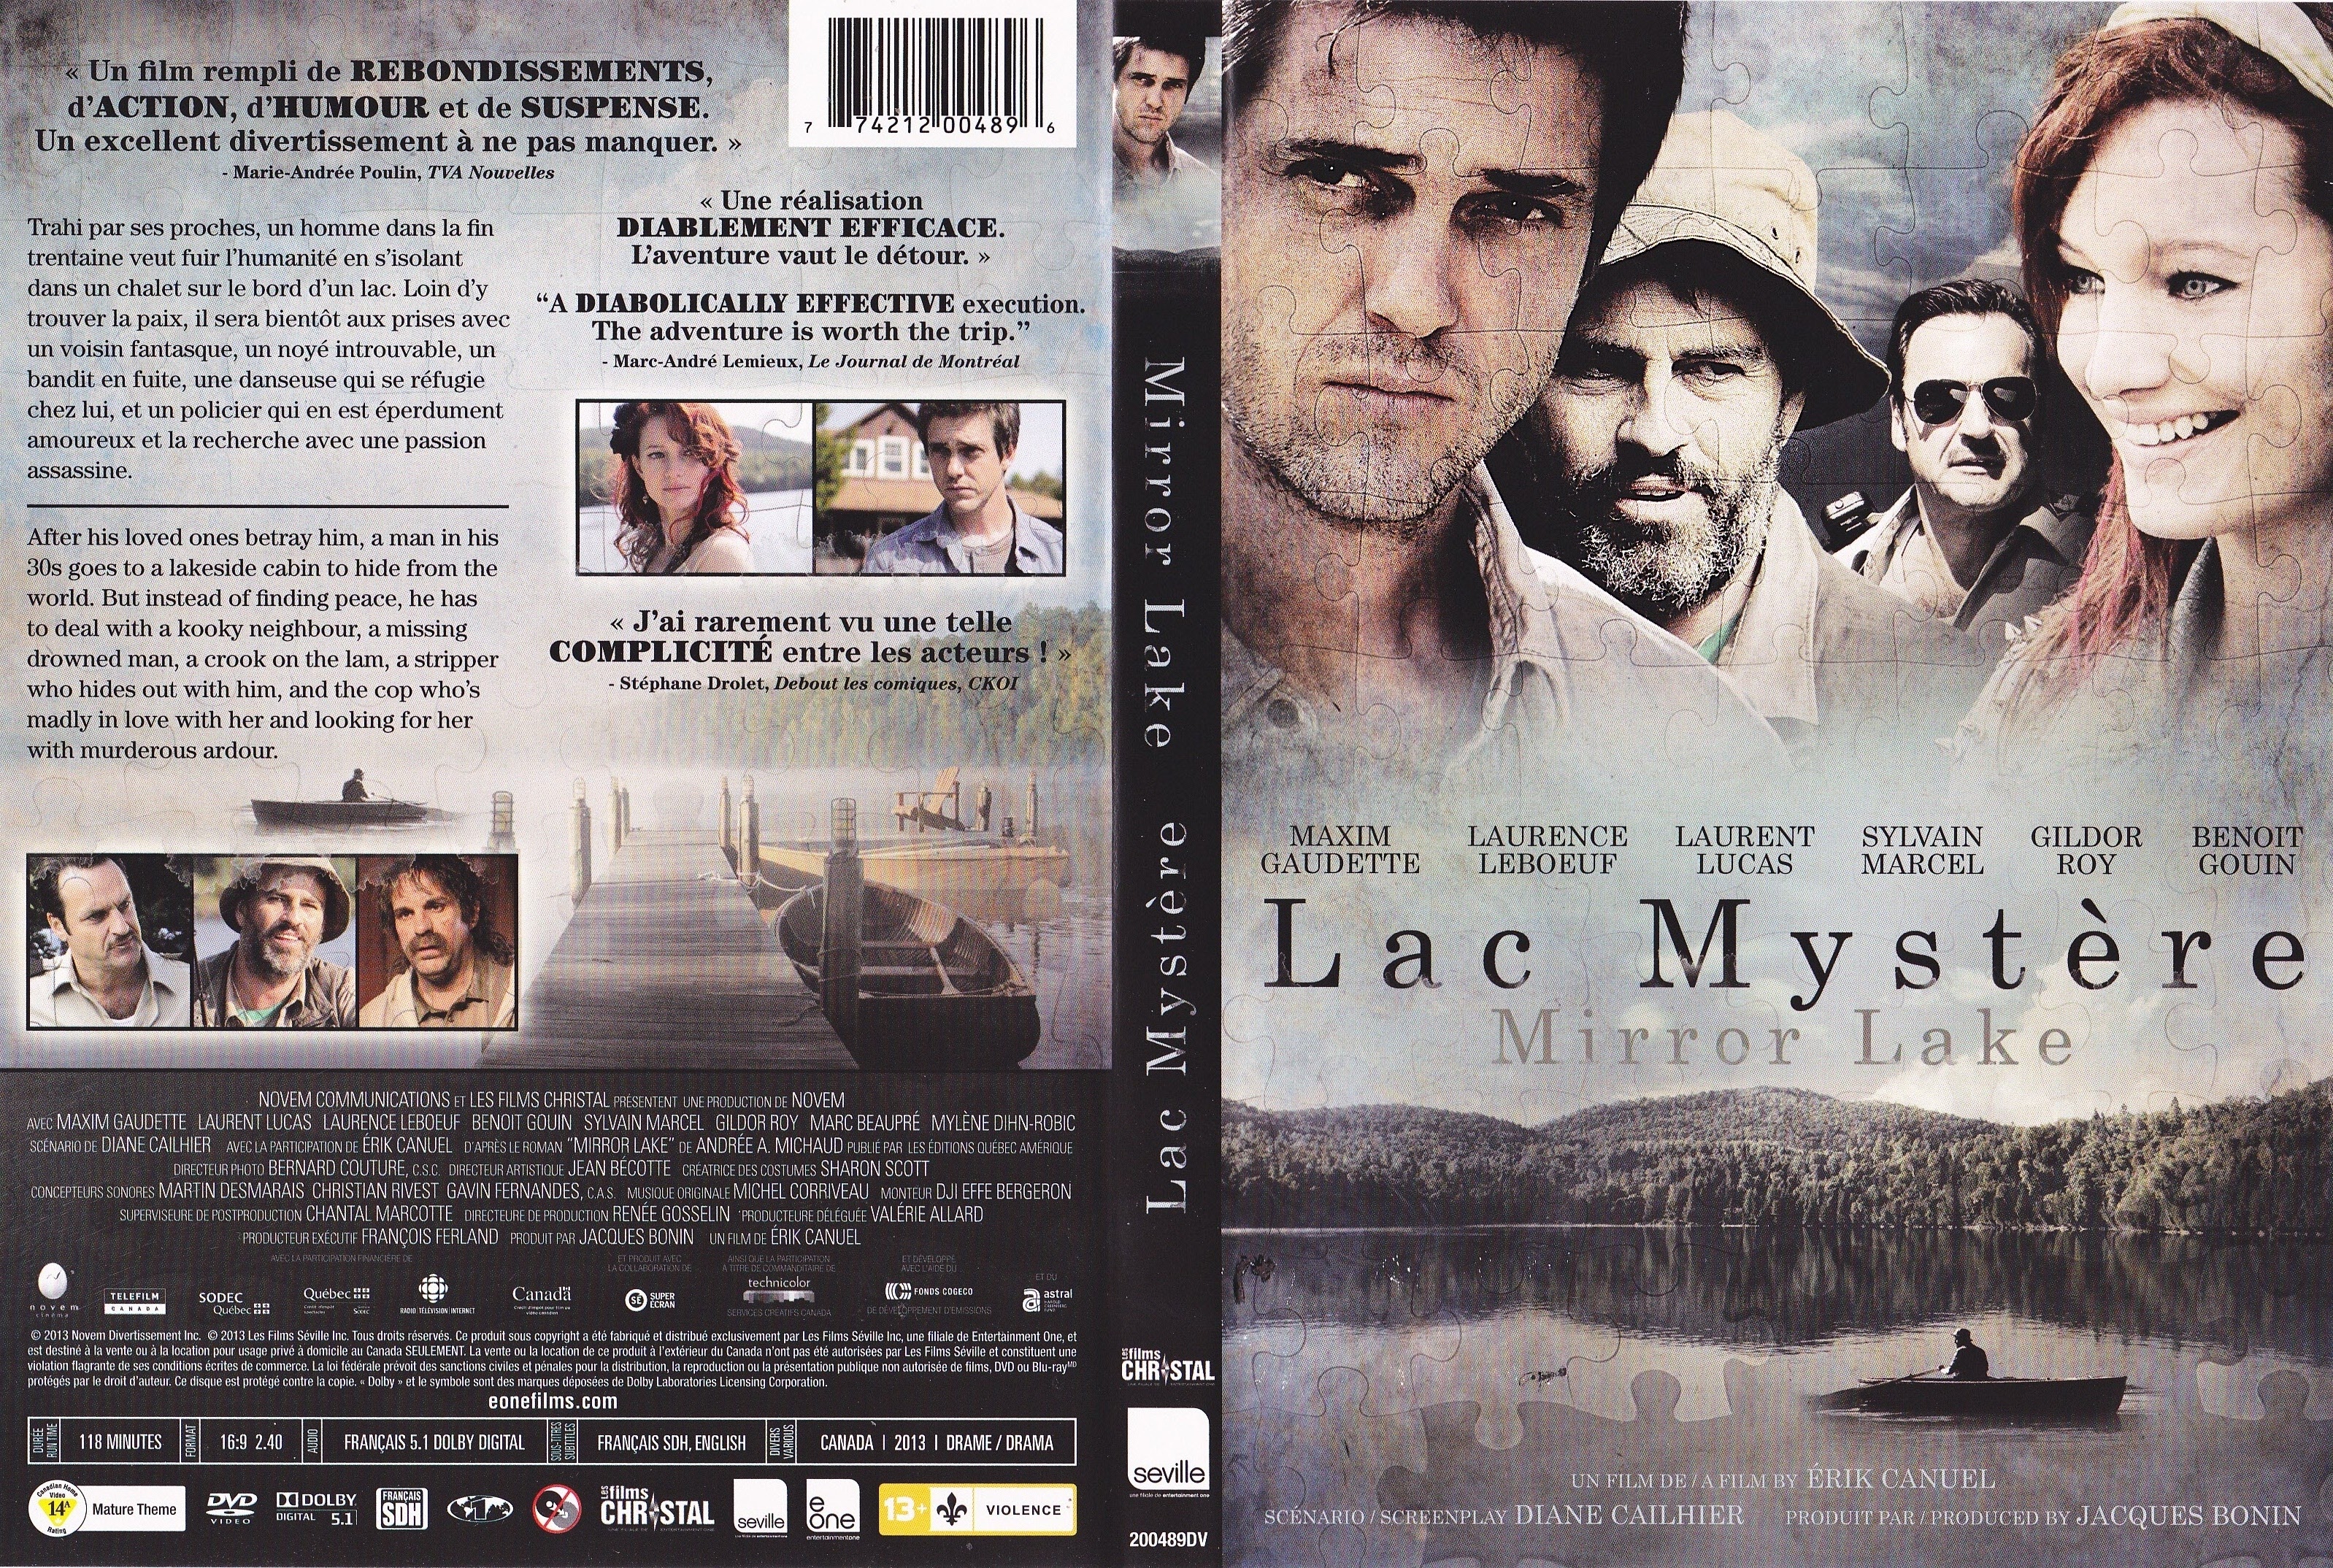 Jaquette DVD Lac mystere - mirror lake (Canadienne)